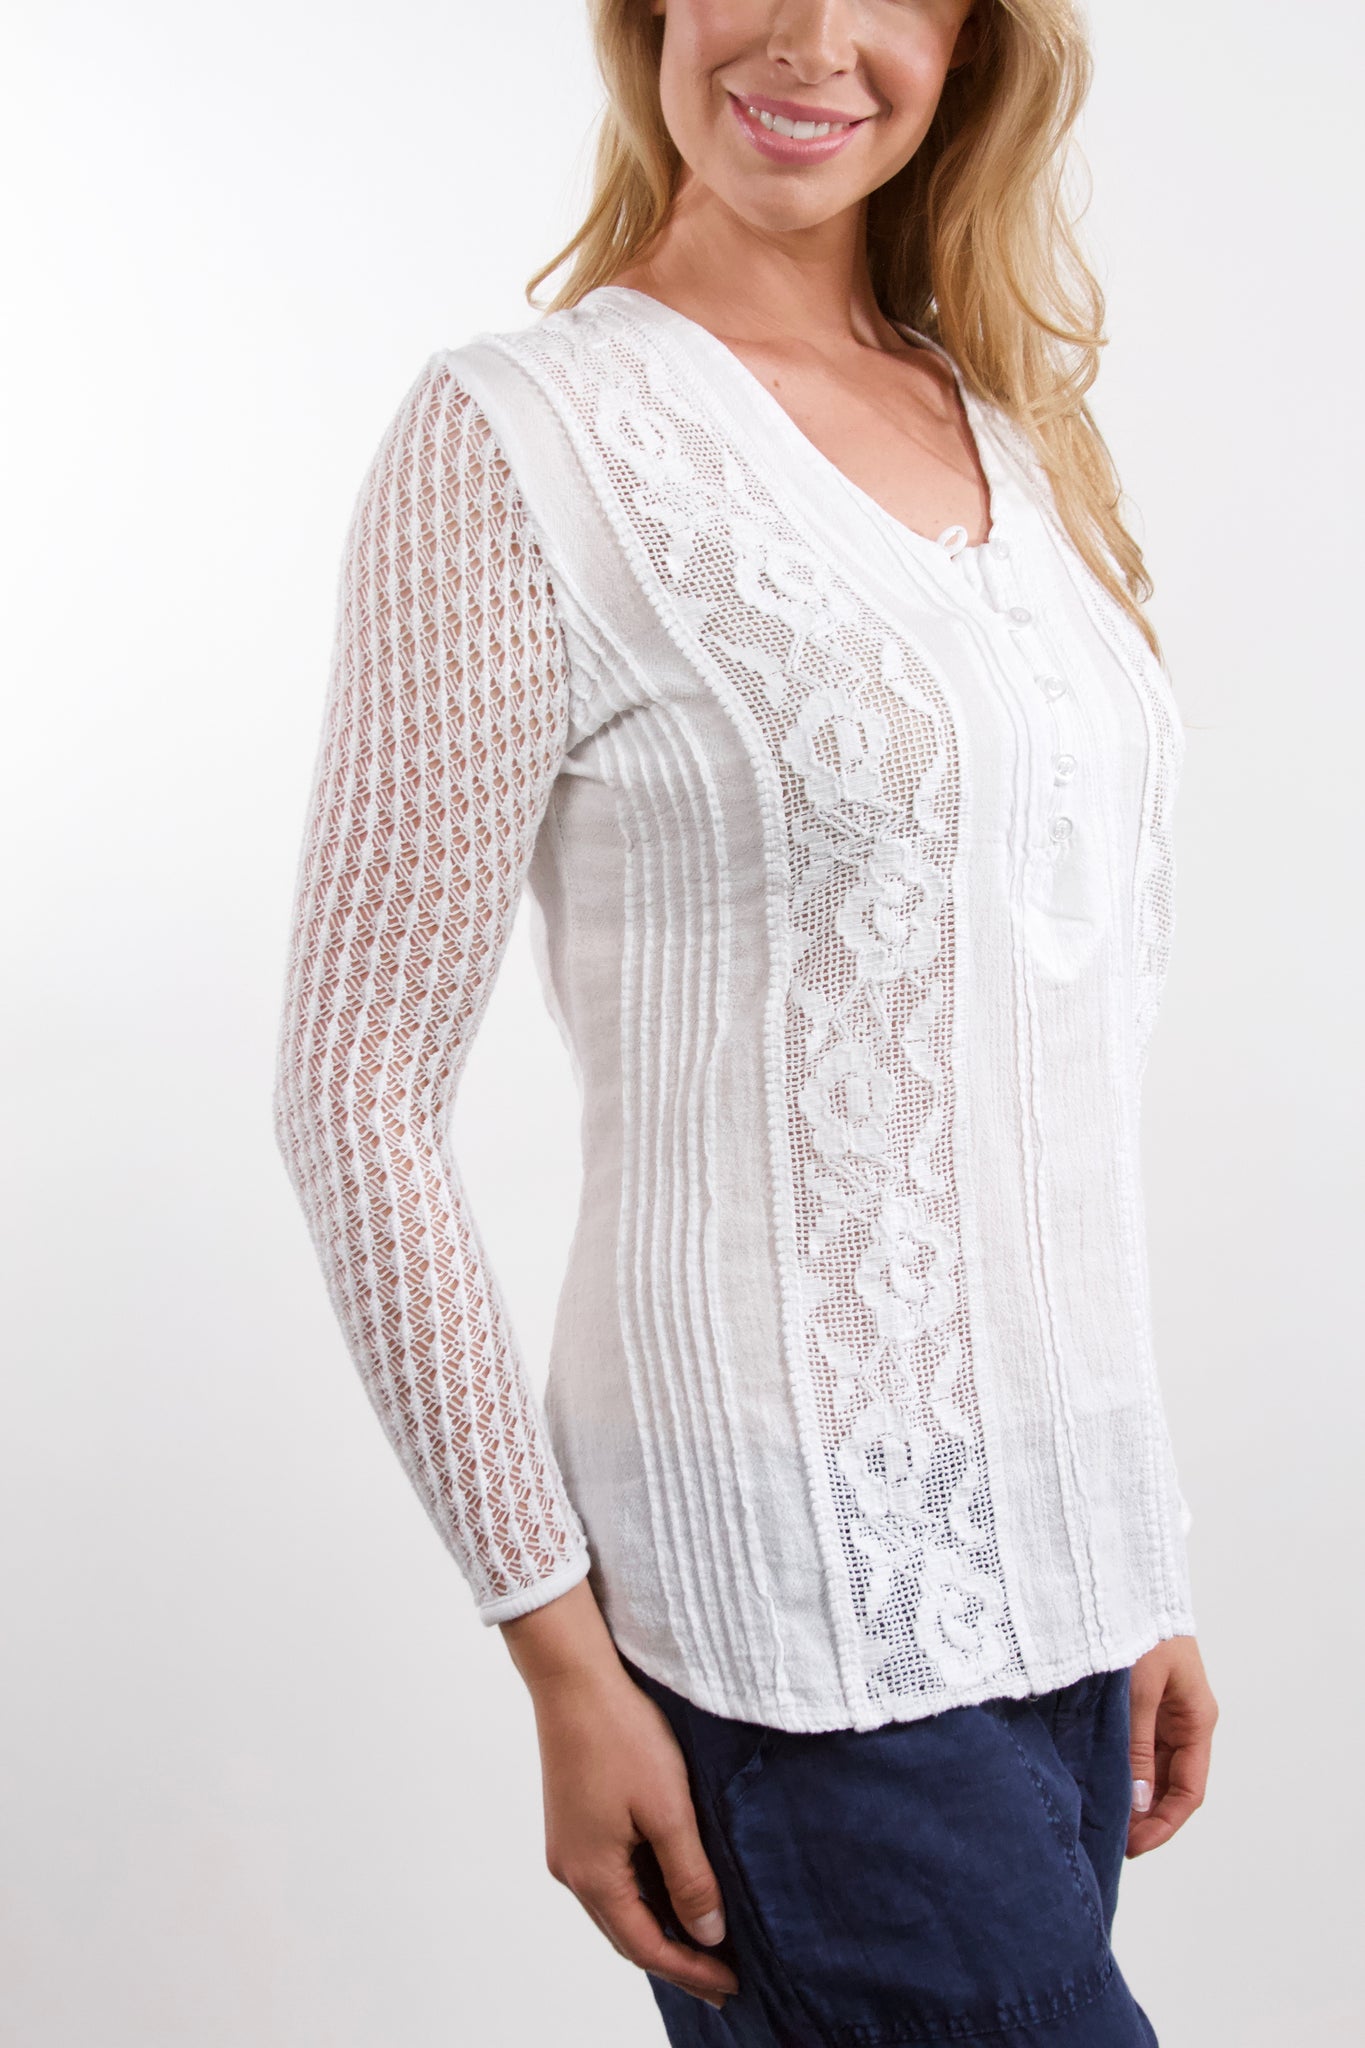 Sara - Cotton Blouse with Lace